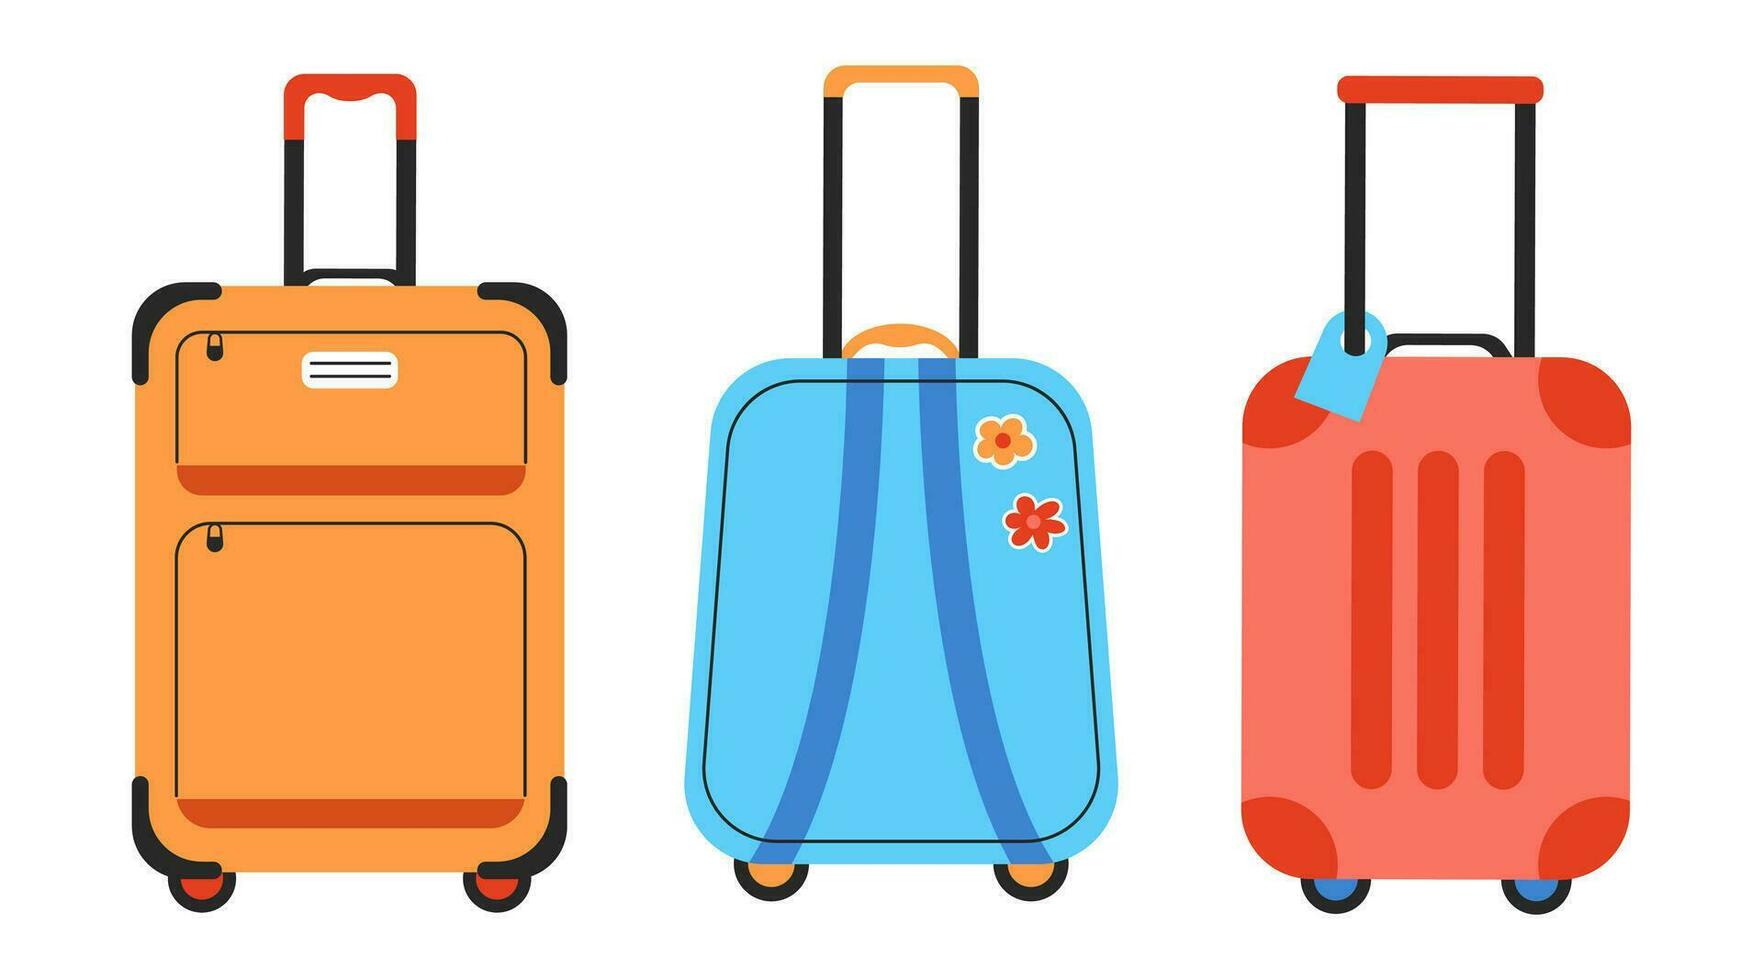 Travel suitcase set. Luggage for tourism concept. Flat vector illustration isolated on white background.